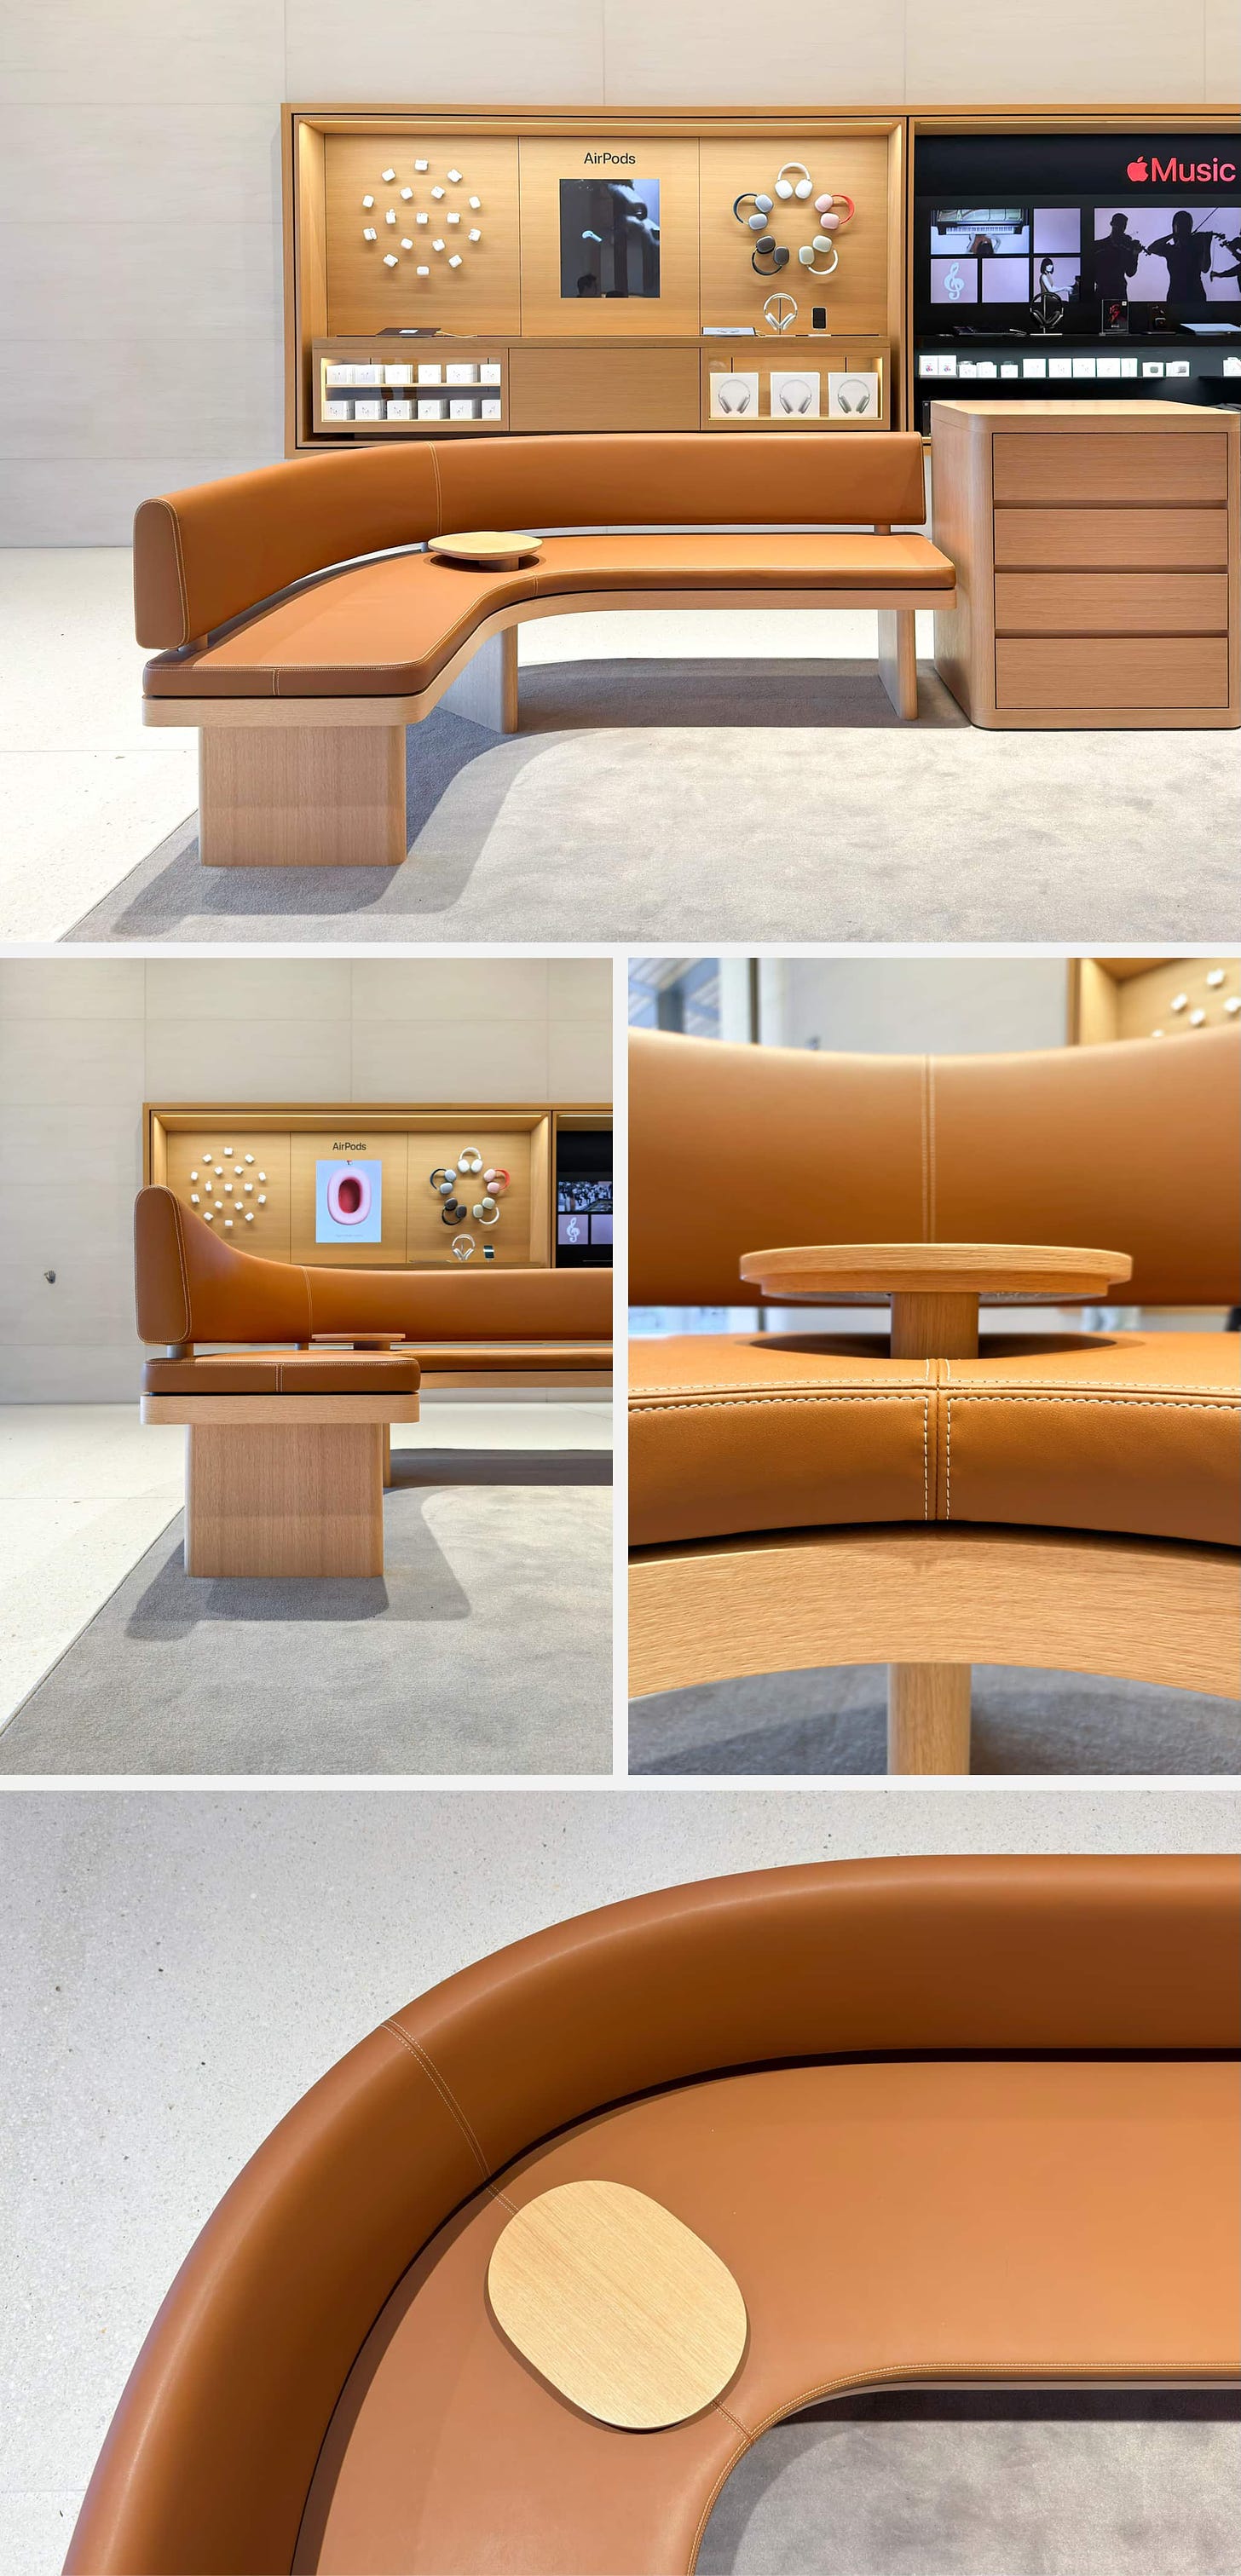 Apple Vision Pro Demo Zone fixtures: a sofa, a cabinet, and carpet.